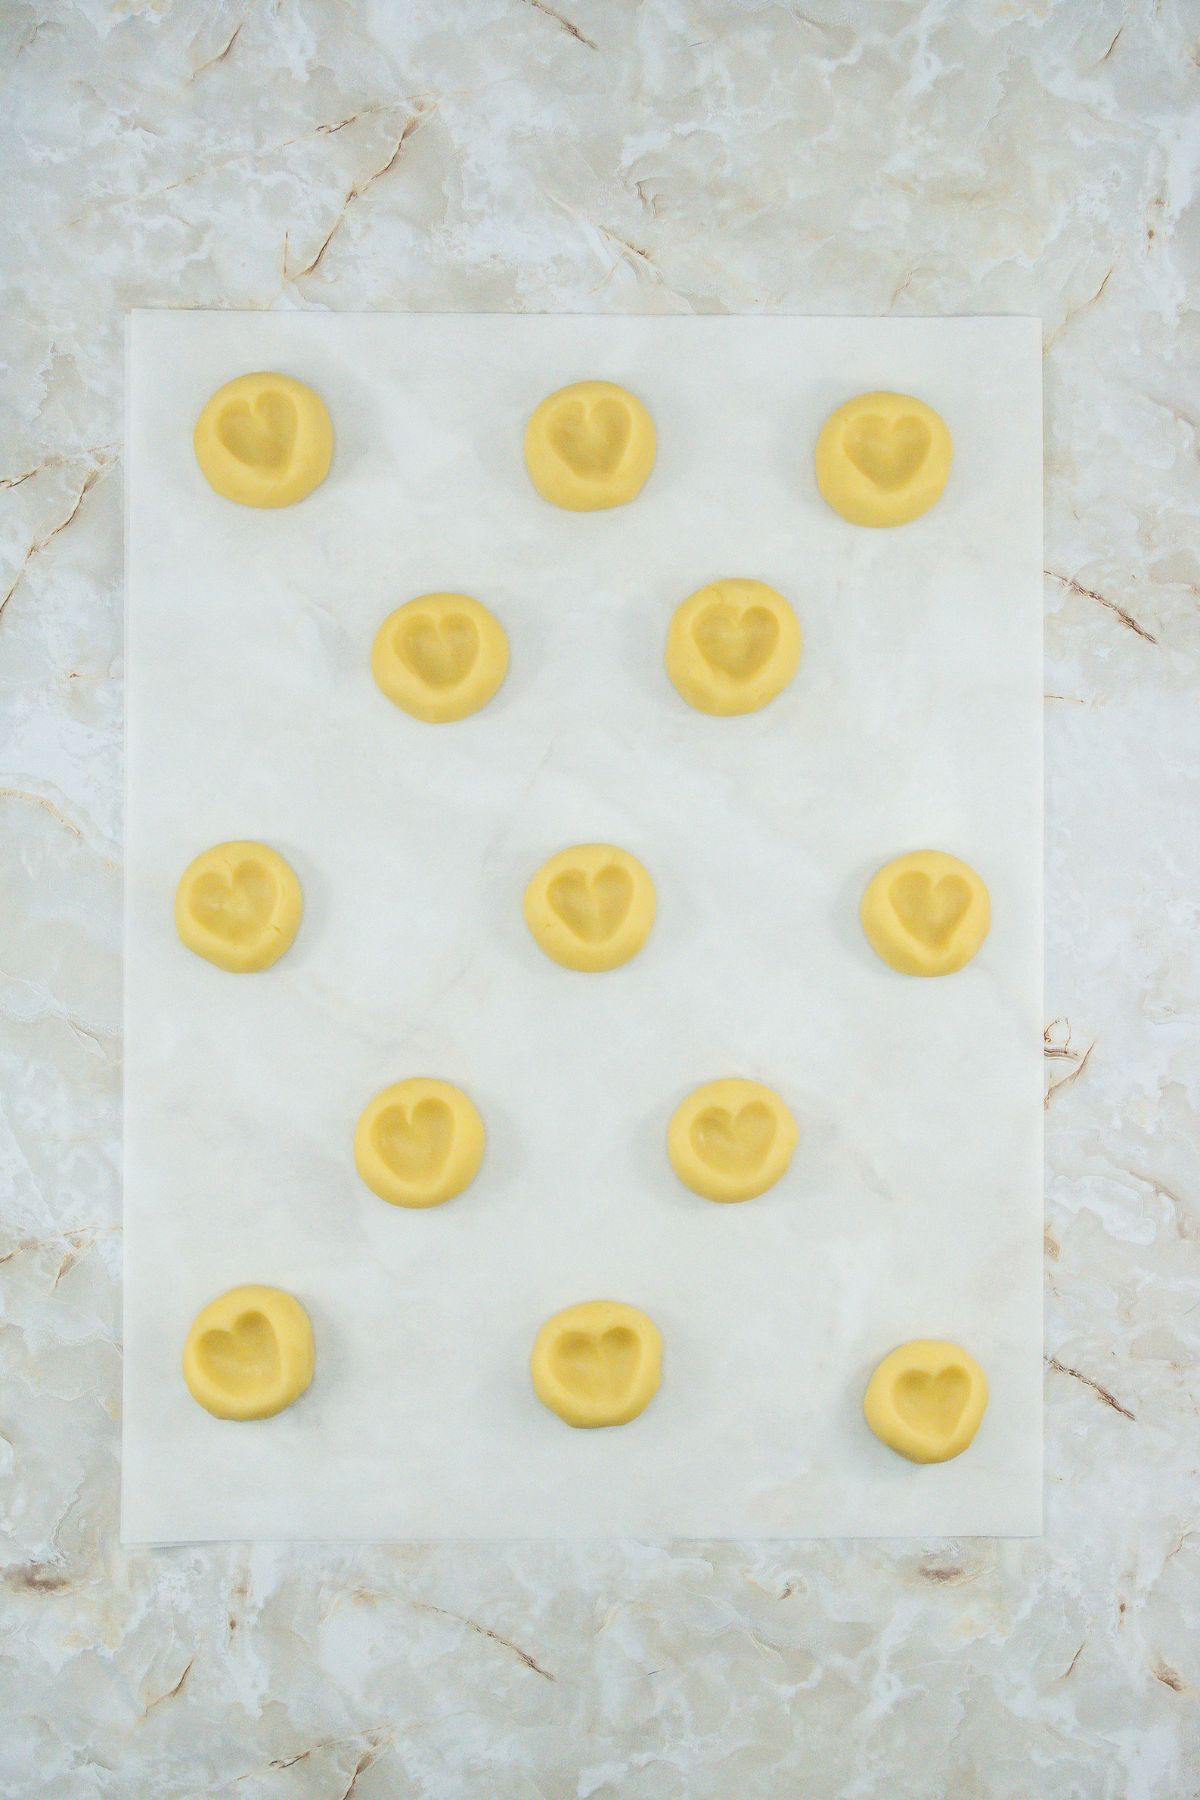 Cookies with hearts shaped in the dough on parchment paper.